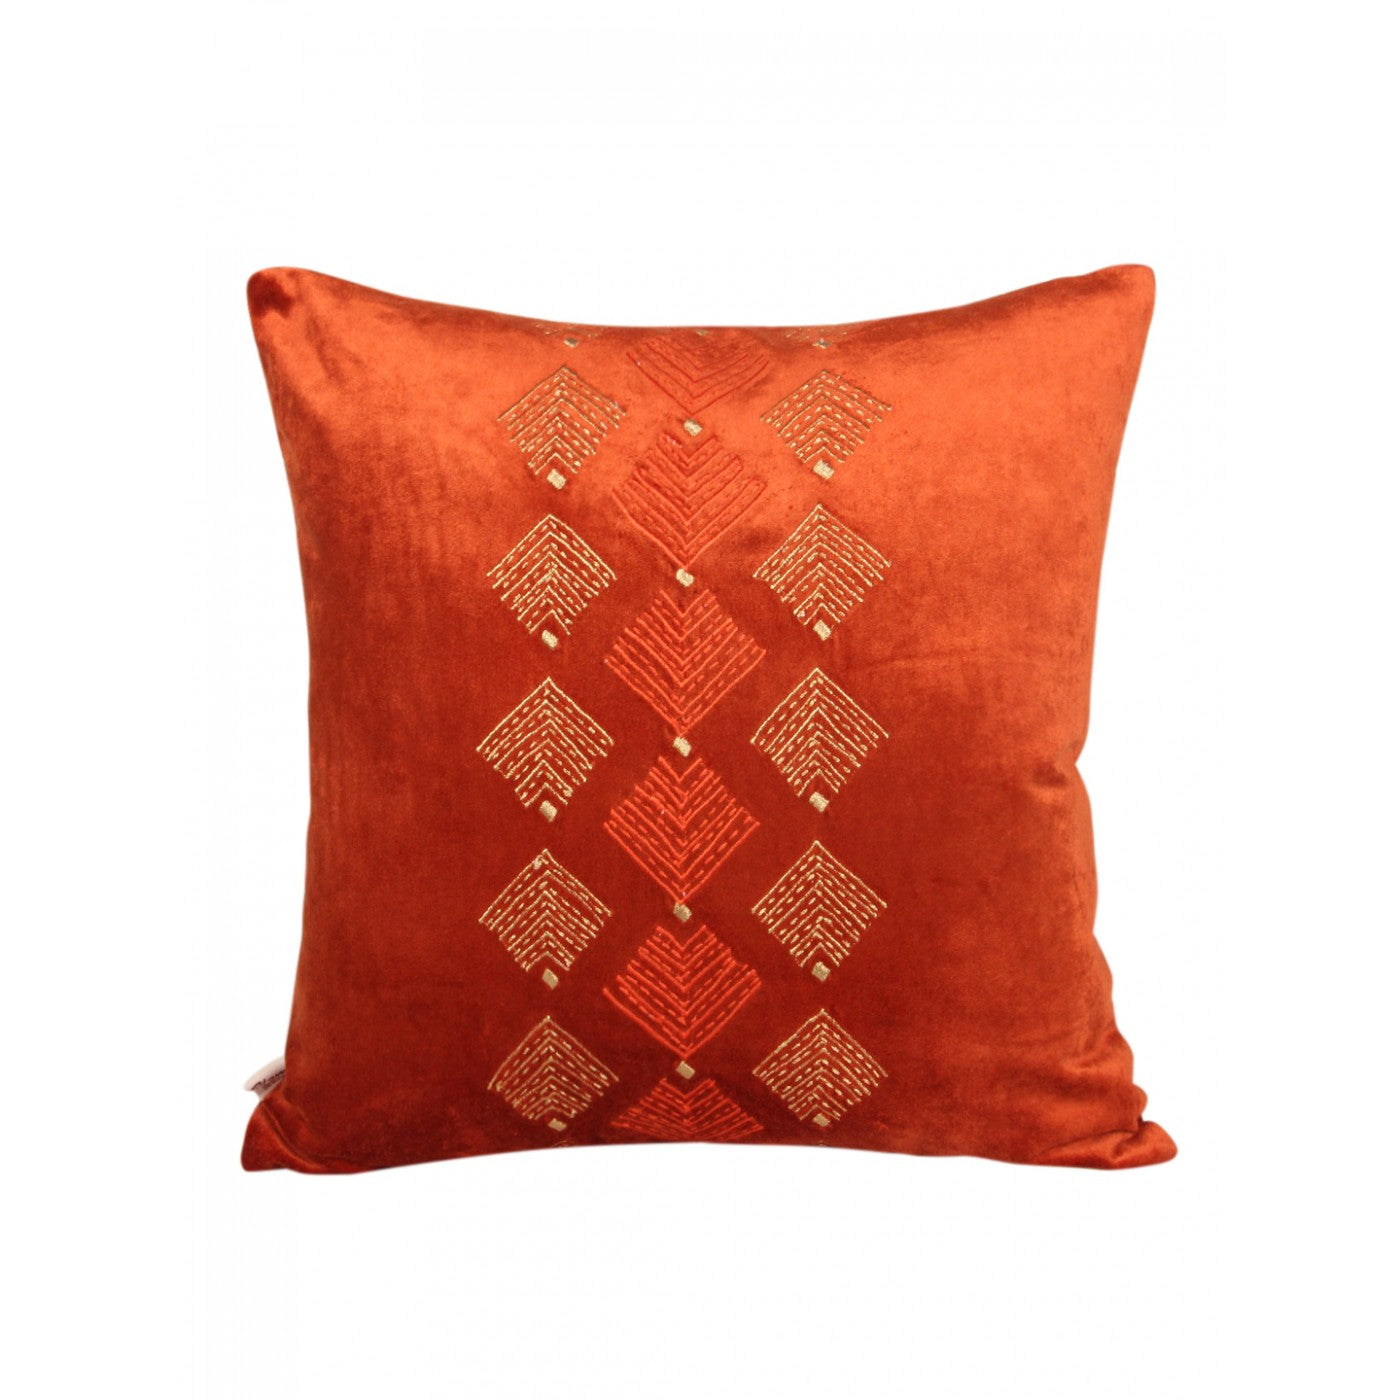 Orchard Mirage: 18x18 Inch Orange Embroidered Velvet Cushion Cover